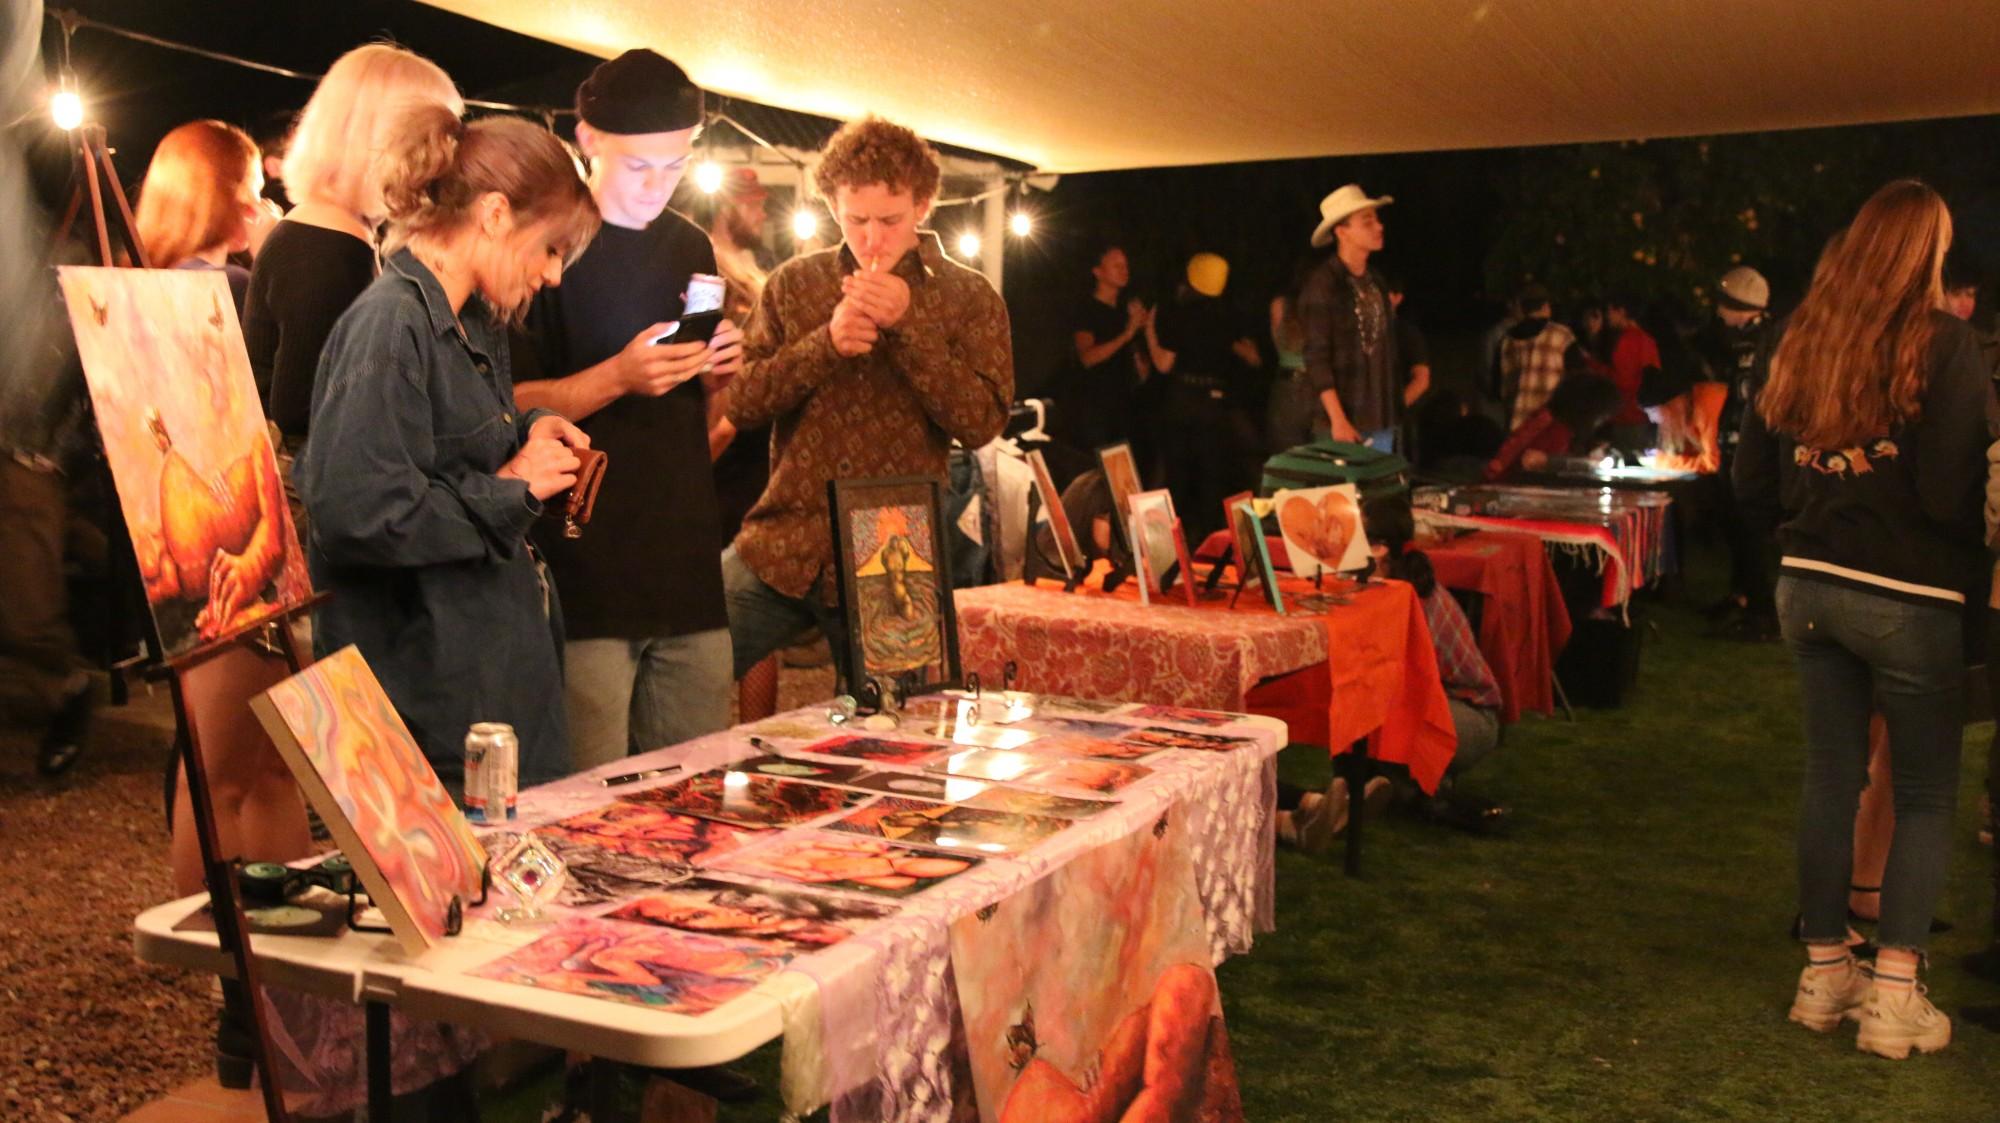 Scum Fest, held on Nov. 16, featured many local artists and vendors. The event was held to raise funds for a new venue for musicians, artists and collaborators to share in town.